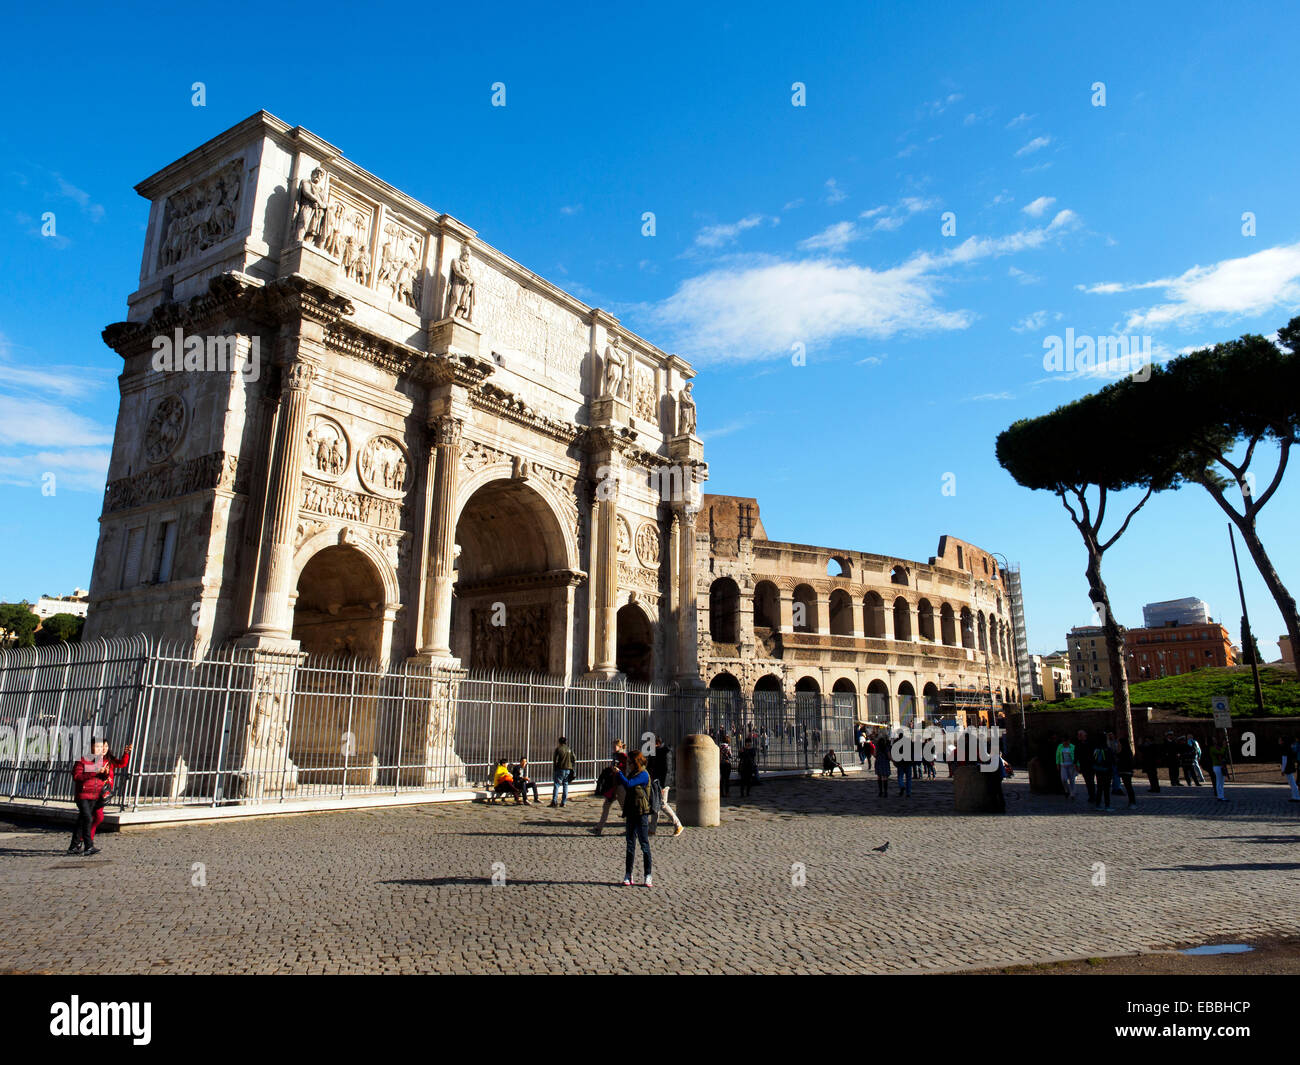 The Arch of Constantine and the Colosseum - Rome, Italy Stock Photo